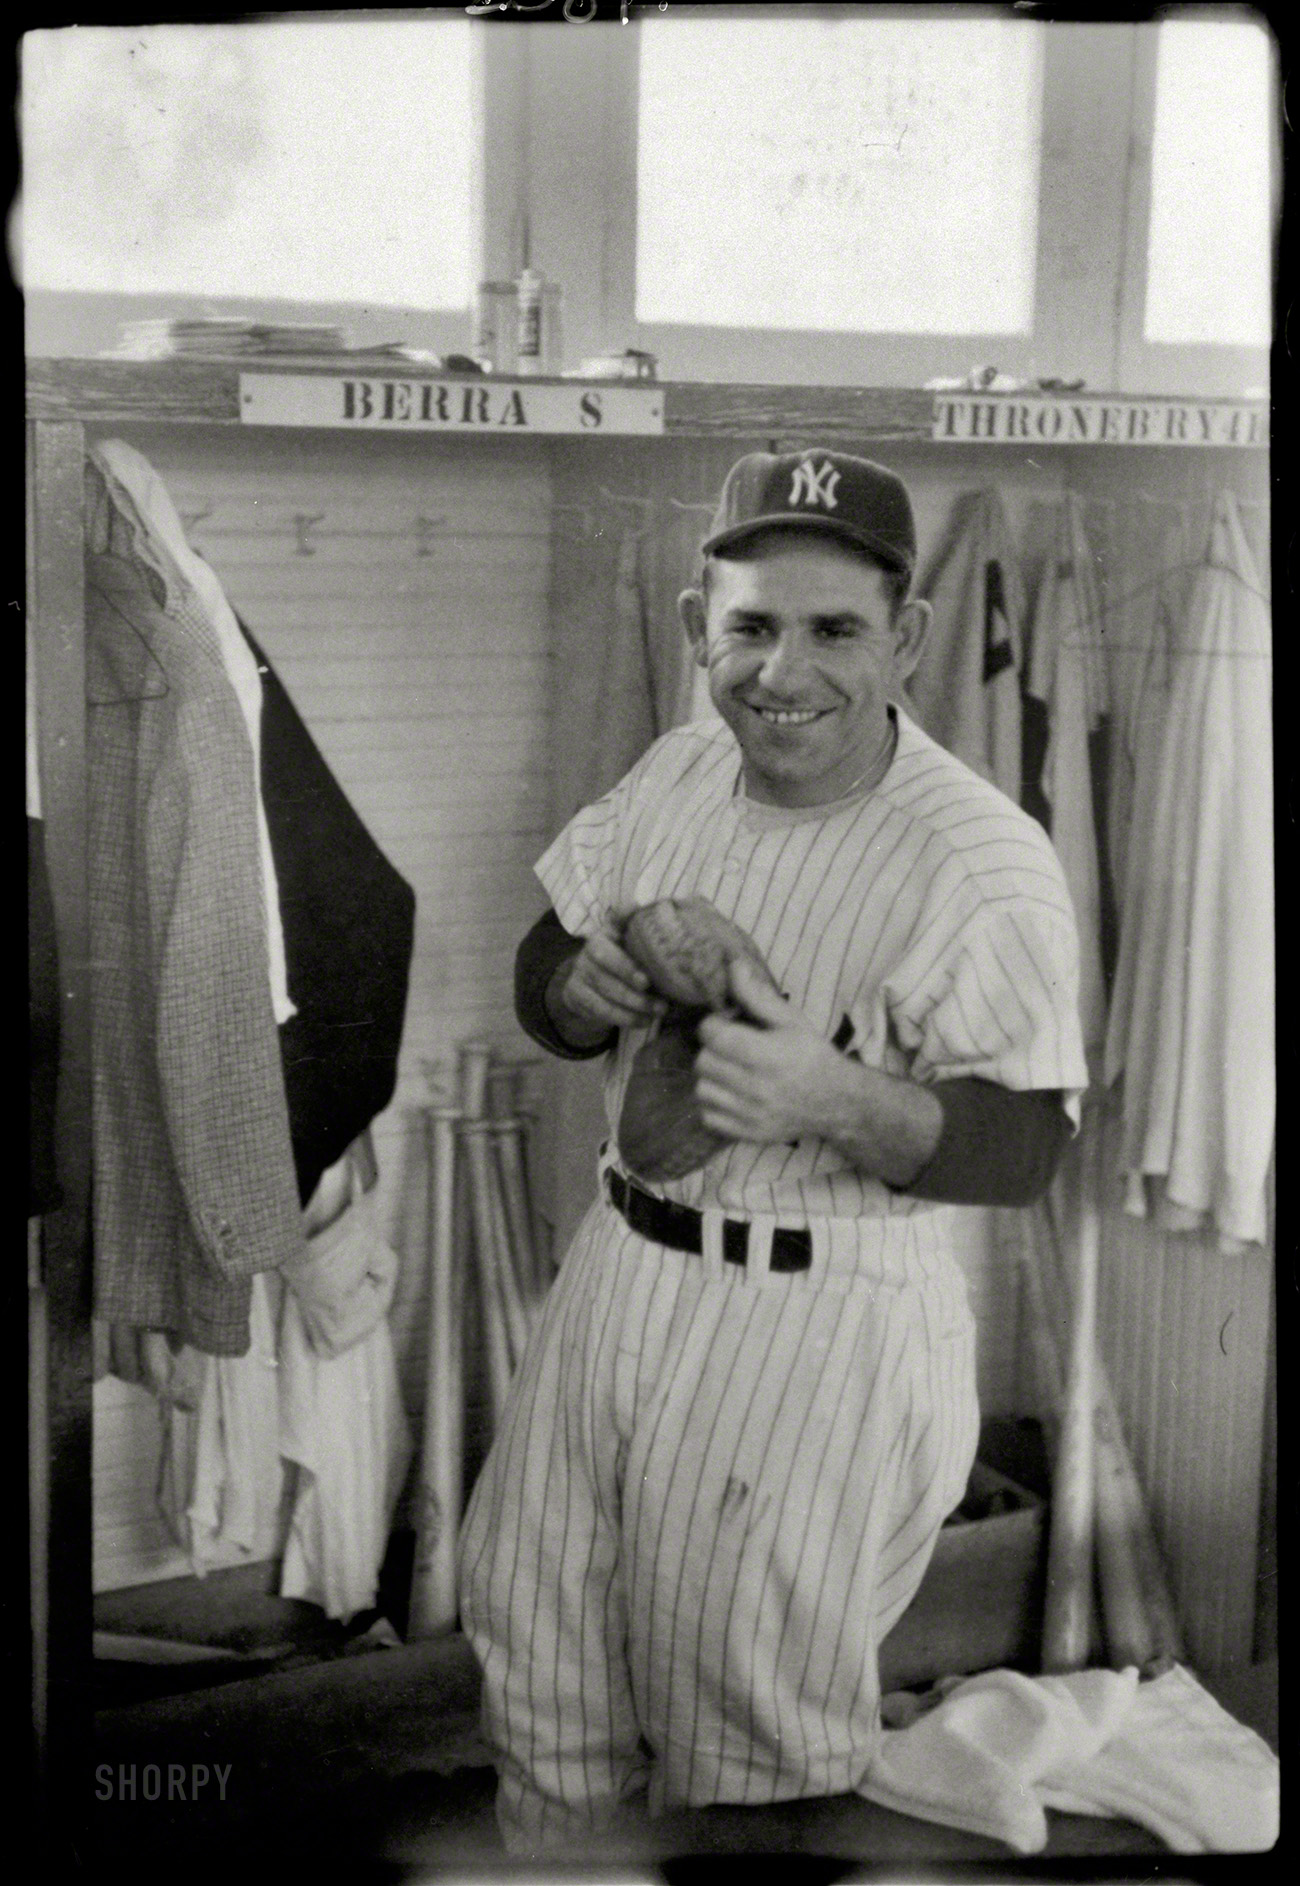 &nbsp; &nbsp; &nbsp; &nbsp; Yogi Berra, Yankees Hall of Fame Catcher With a One-of-a-Kind Wit, Dies at 90
March 20, 1957. "New York Yankees baseball player Yogi Berra, three-quarter length portrait, in uniform, in the locker room." 35mm negative by Marvin Newman for Look magazine. View full size.